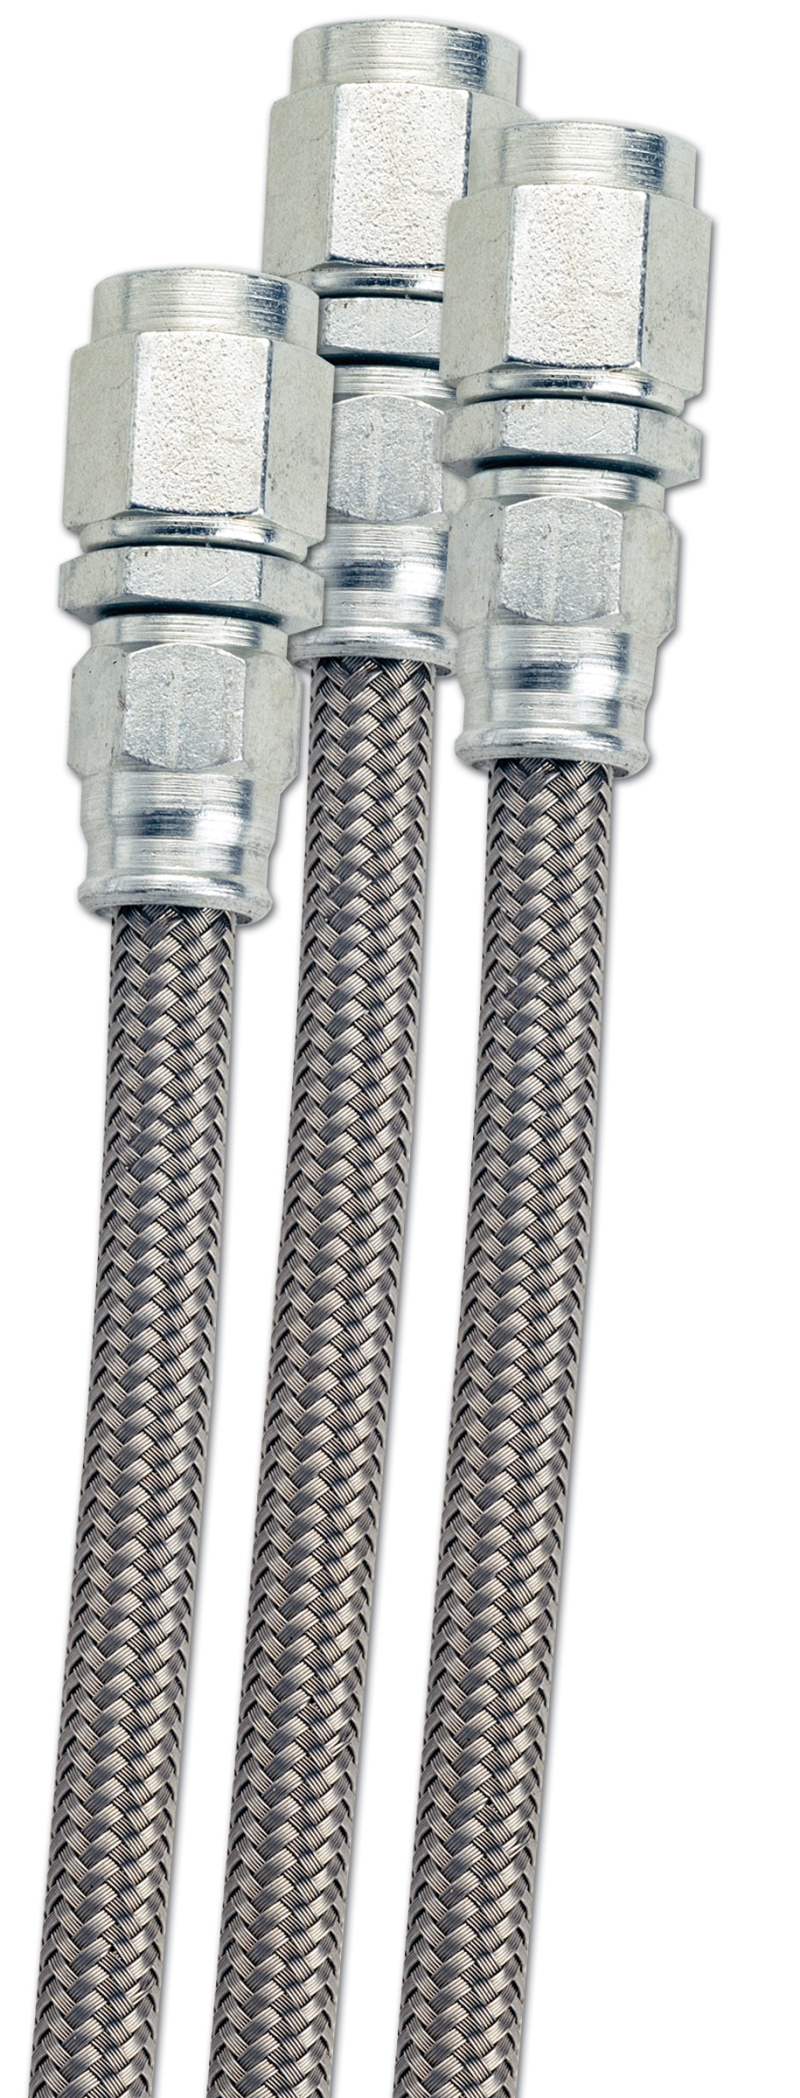 Fragola 601508 P.T.F.E. Braided Stainless Steel Hose, -8 AN, 15 ft. Length